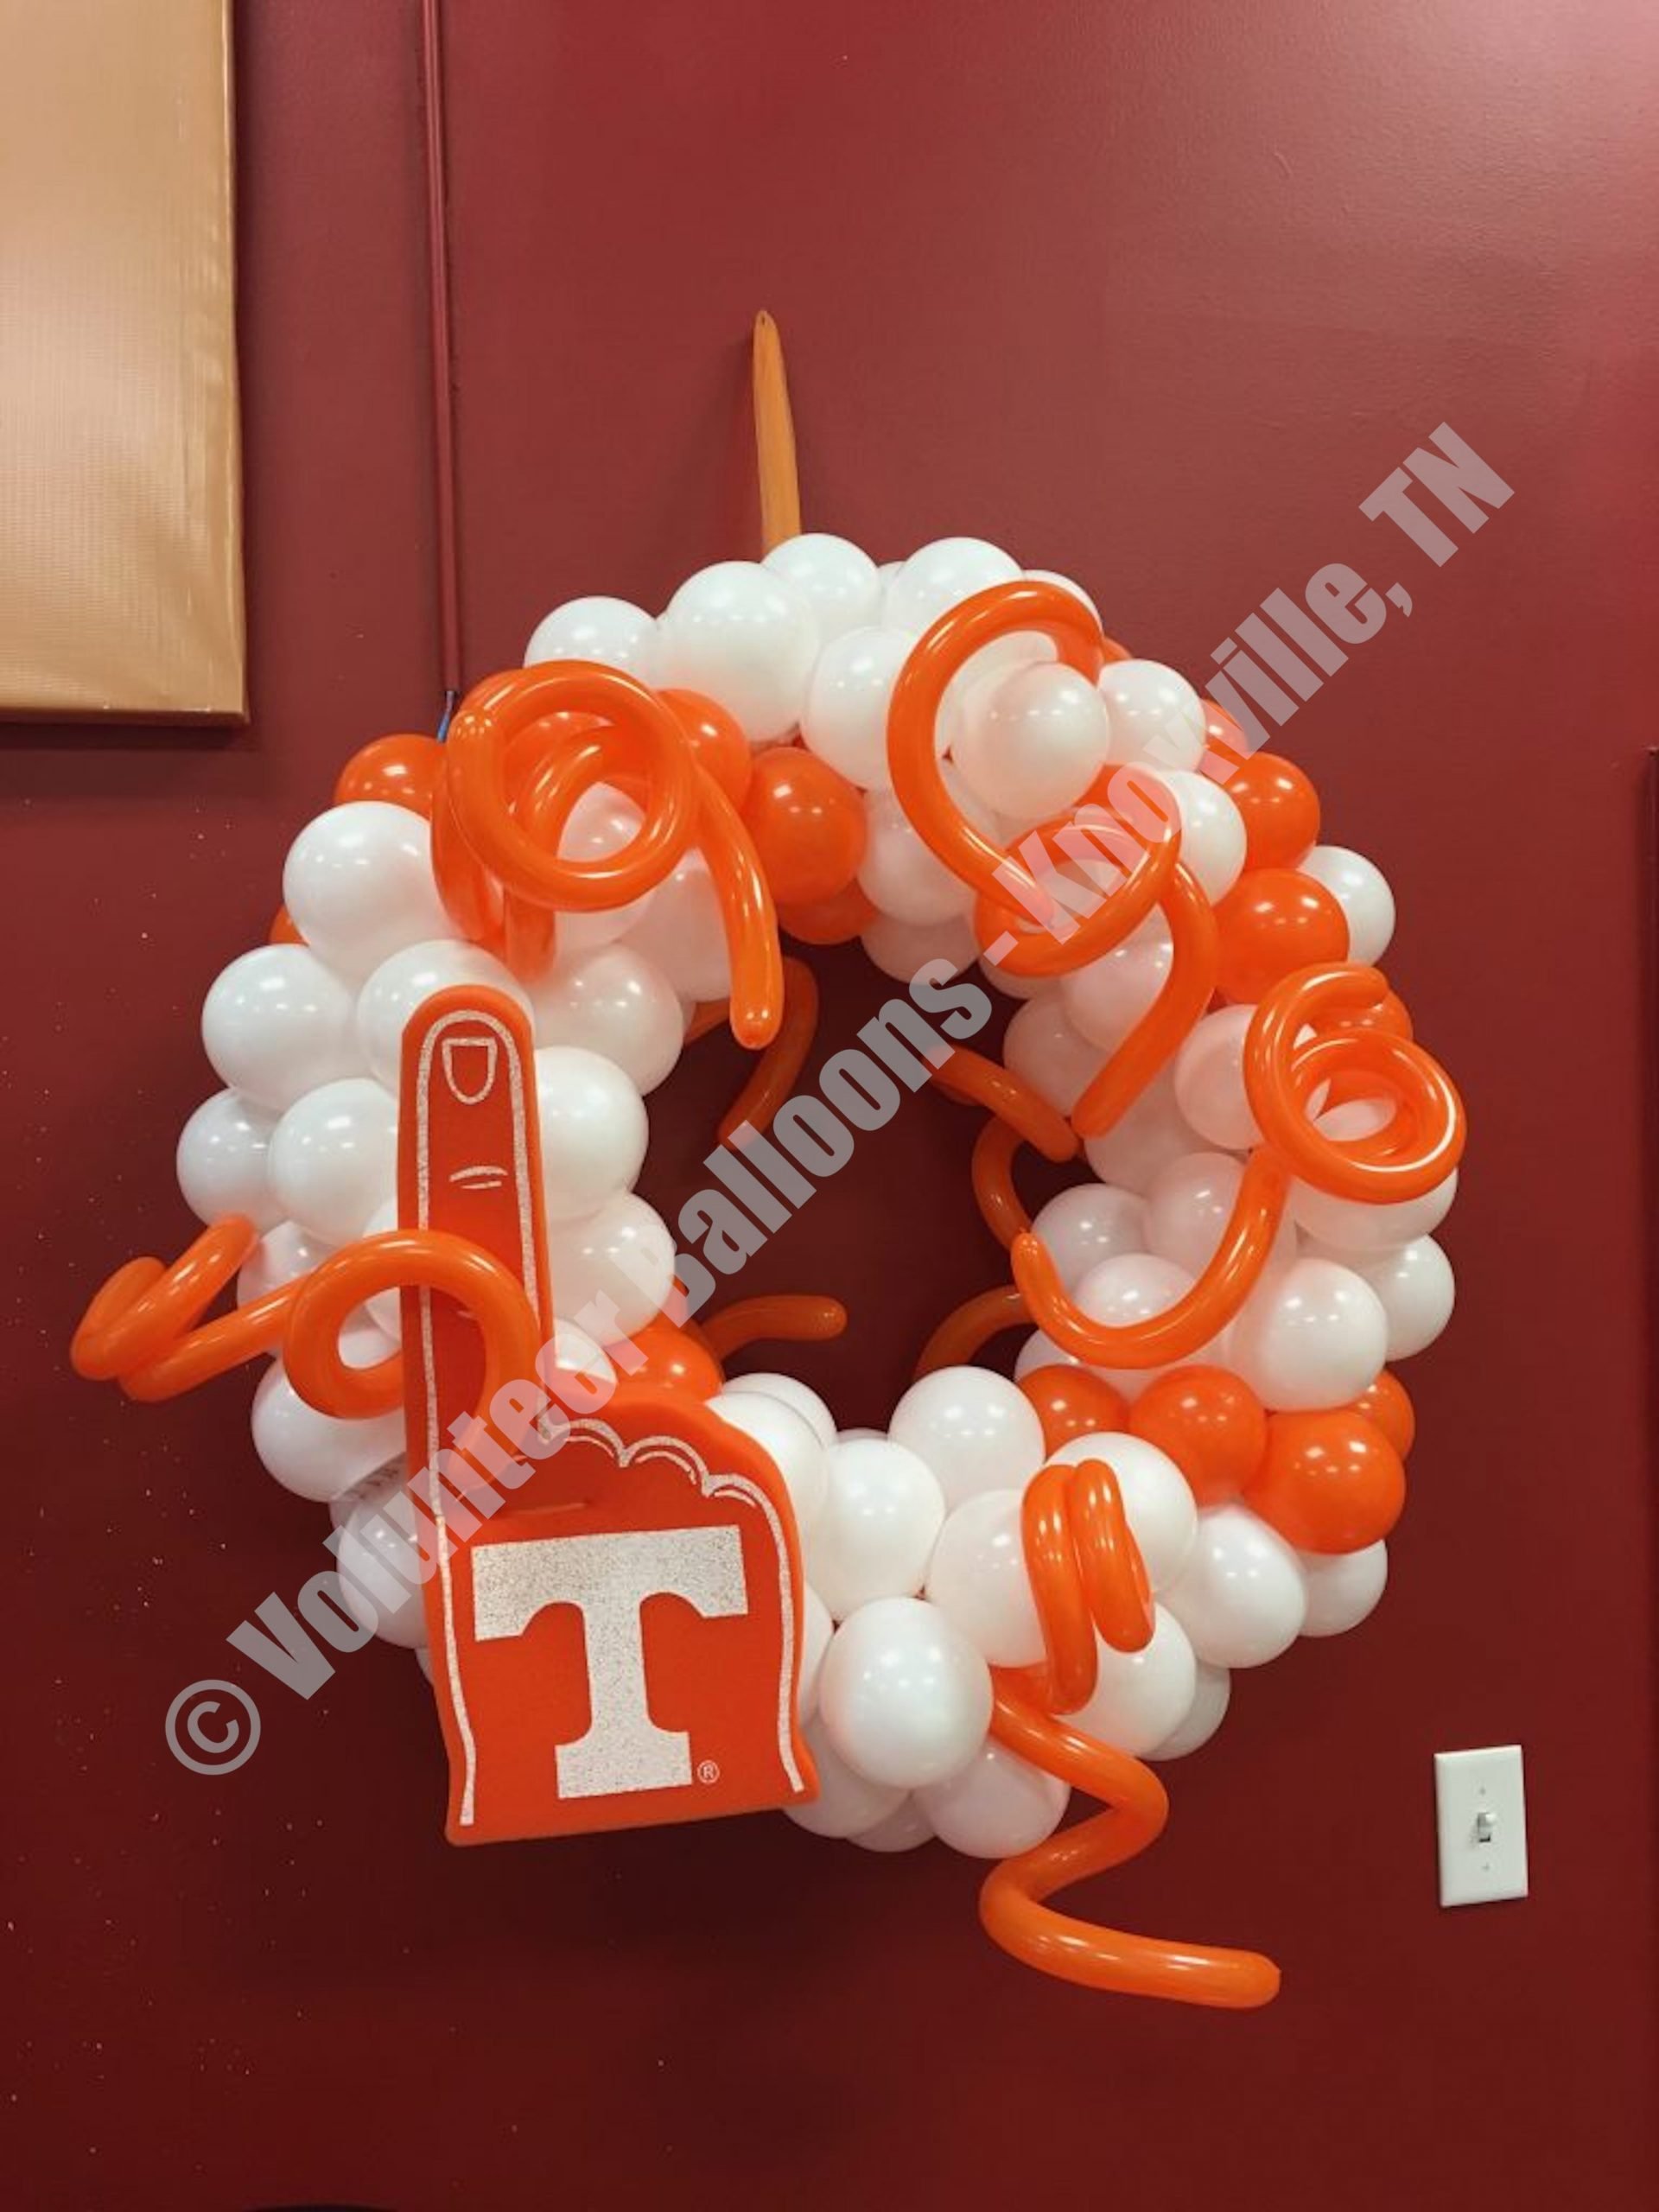 Custom Balloon Sculpture for huge impact and lasting impressions.